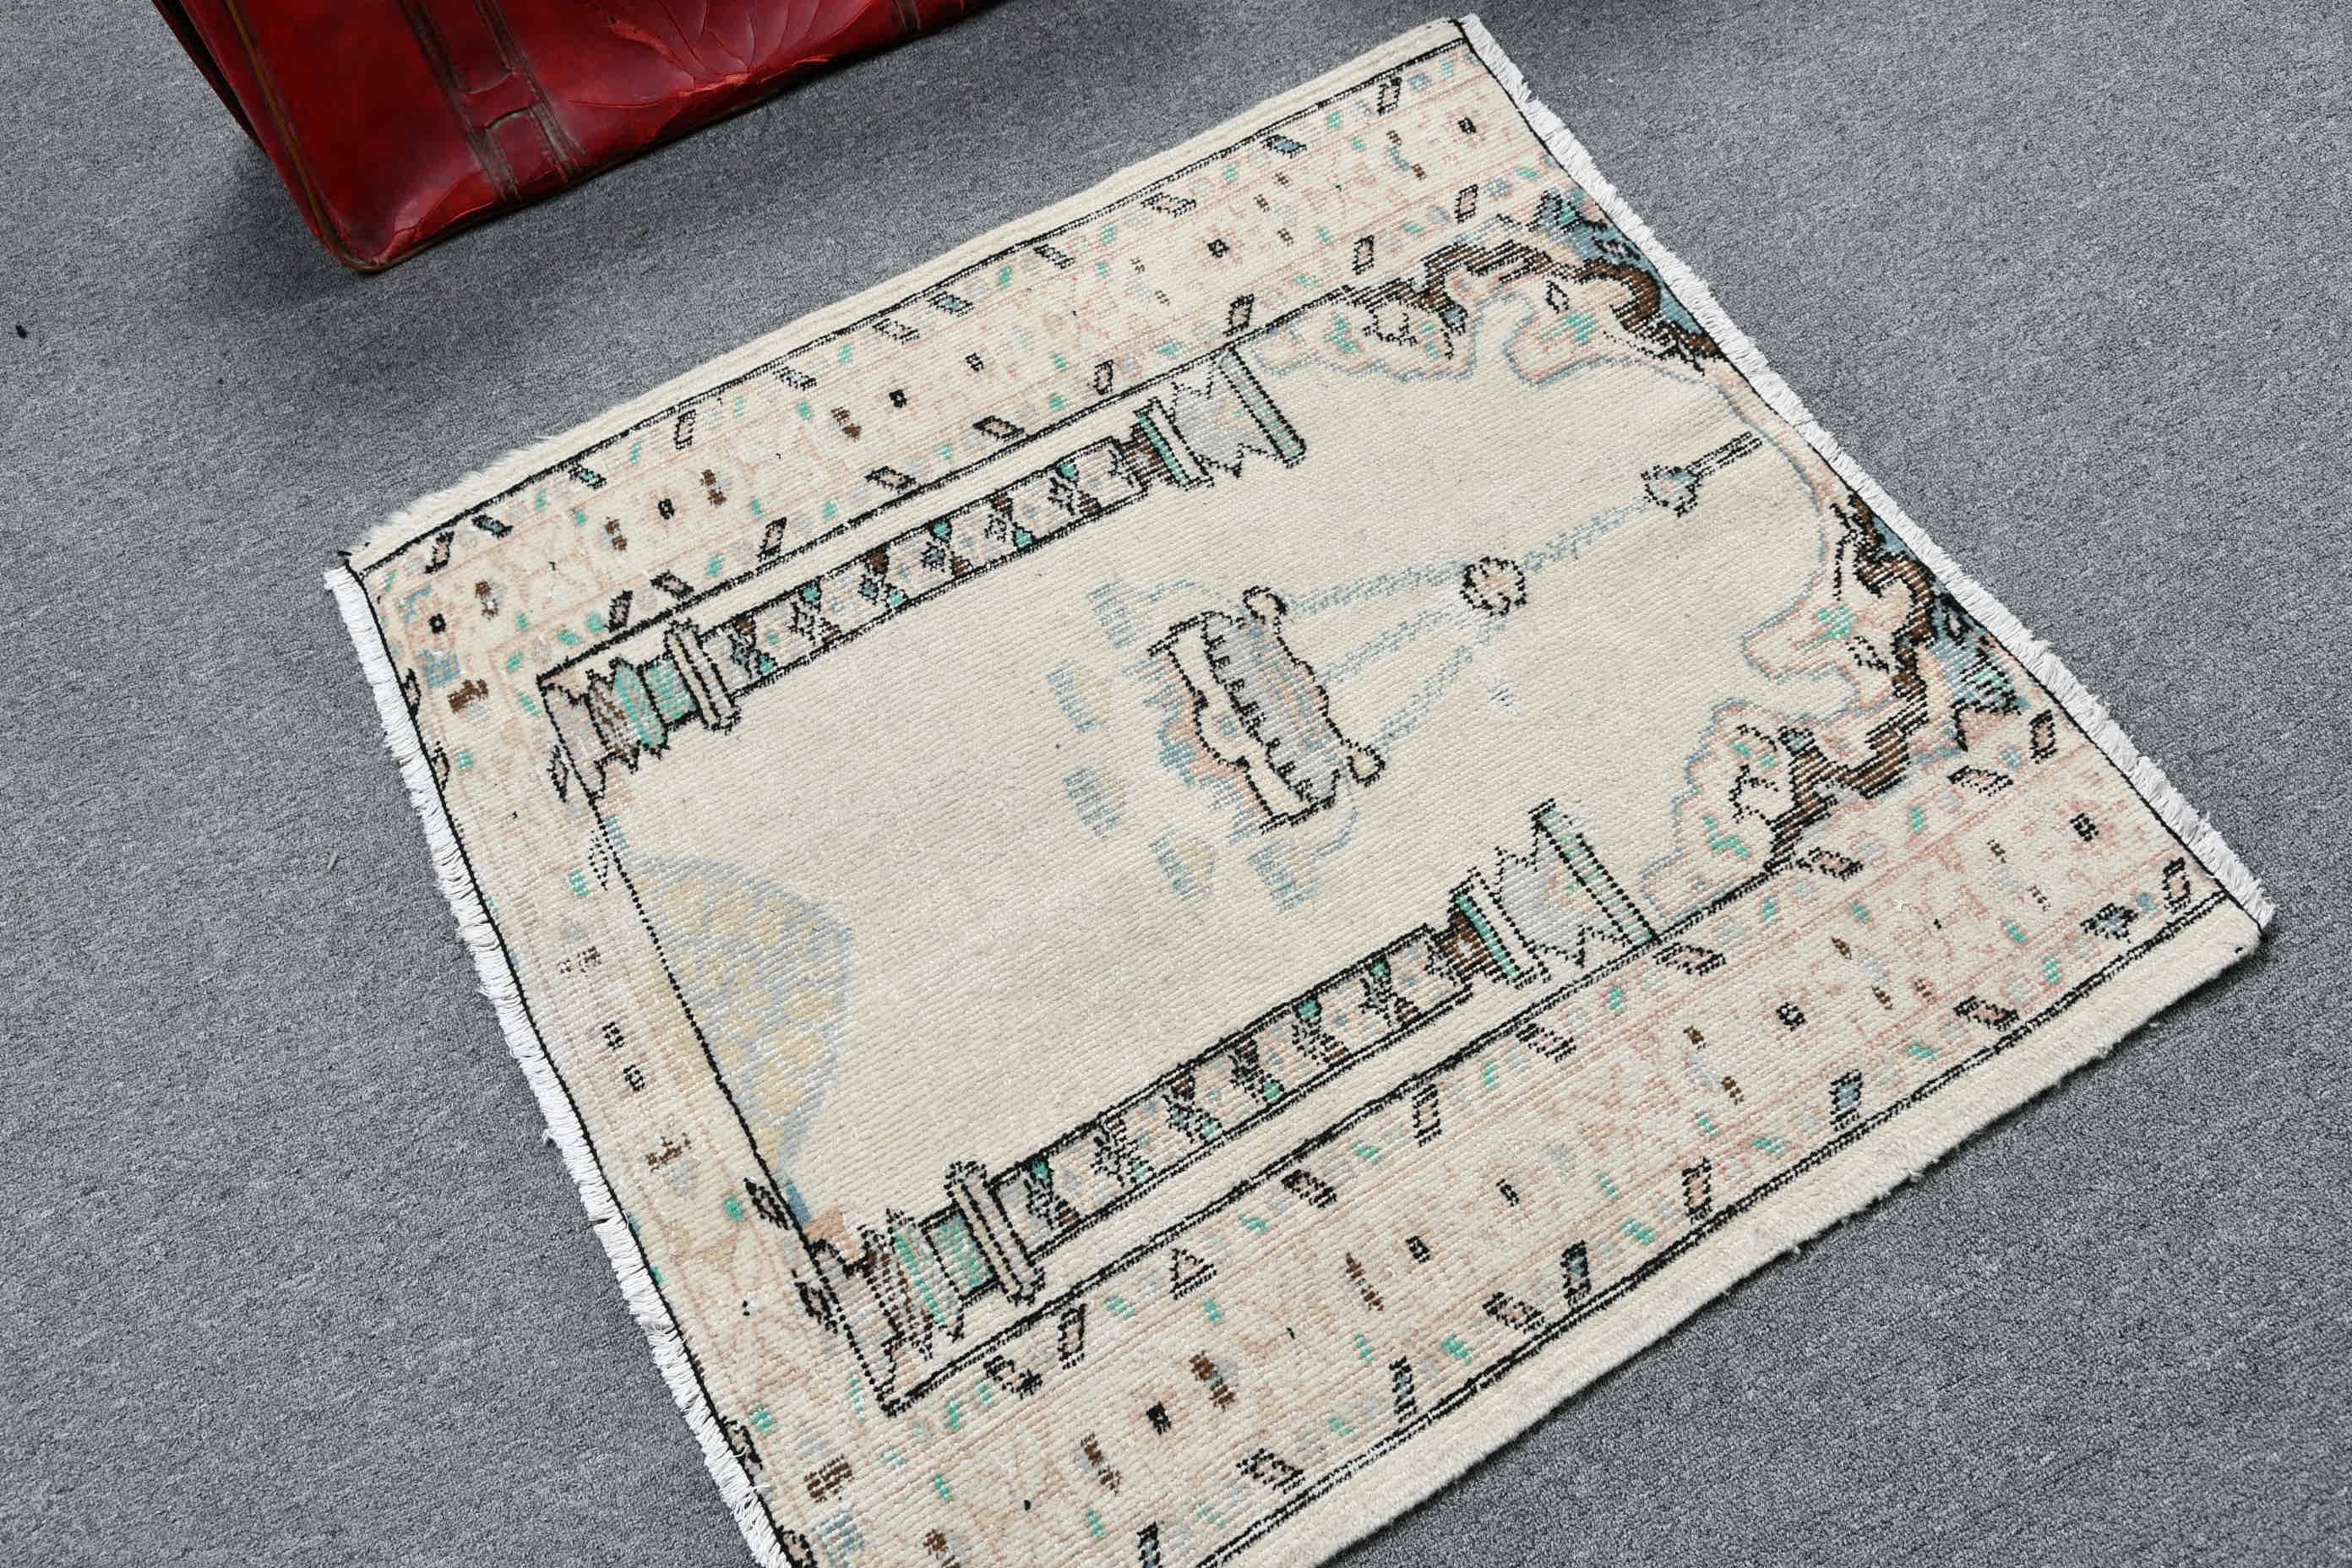 Beige Moroccan Rug, Entry Rugs, Vintage Rugs, Car Mat Rug, Decorative Rugs, Kitchen Rug, Turkish Rug, Antique Rug, 2.9x2.8 ft Small Rugs